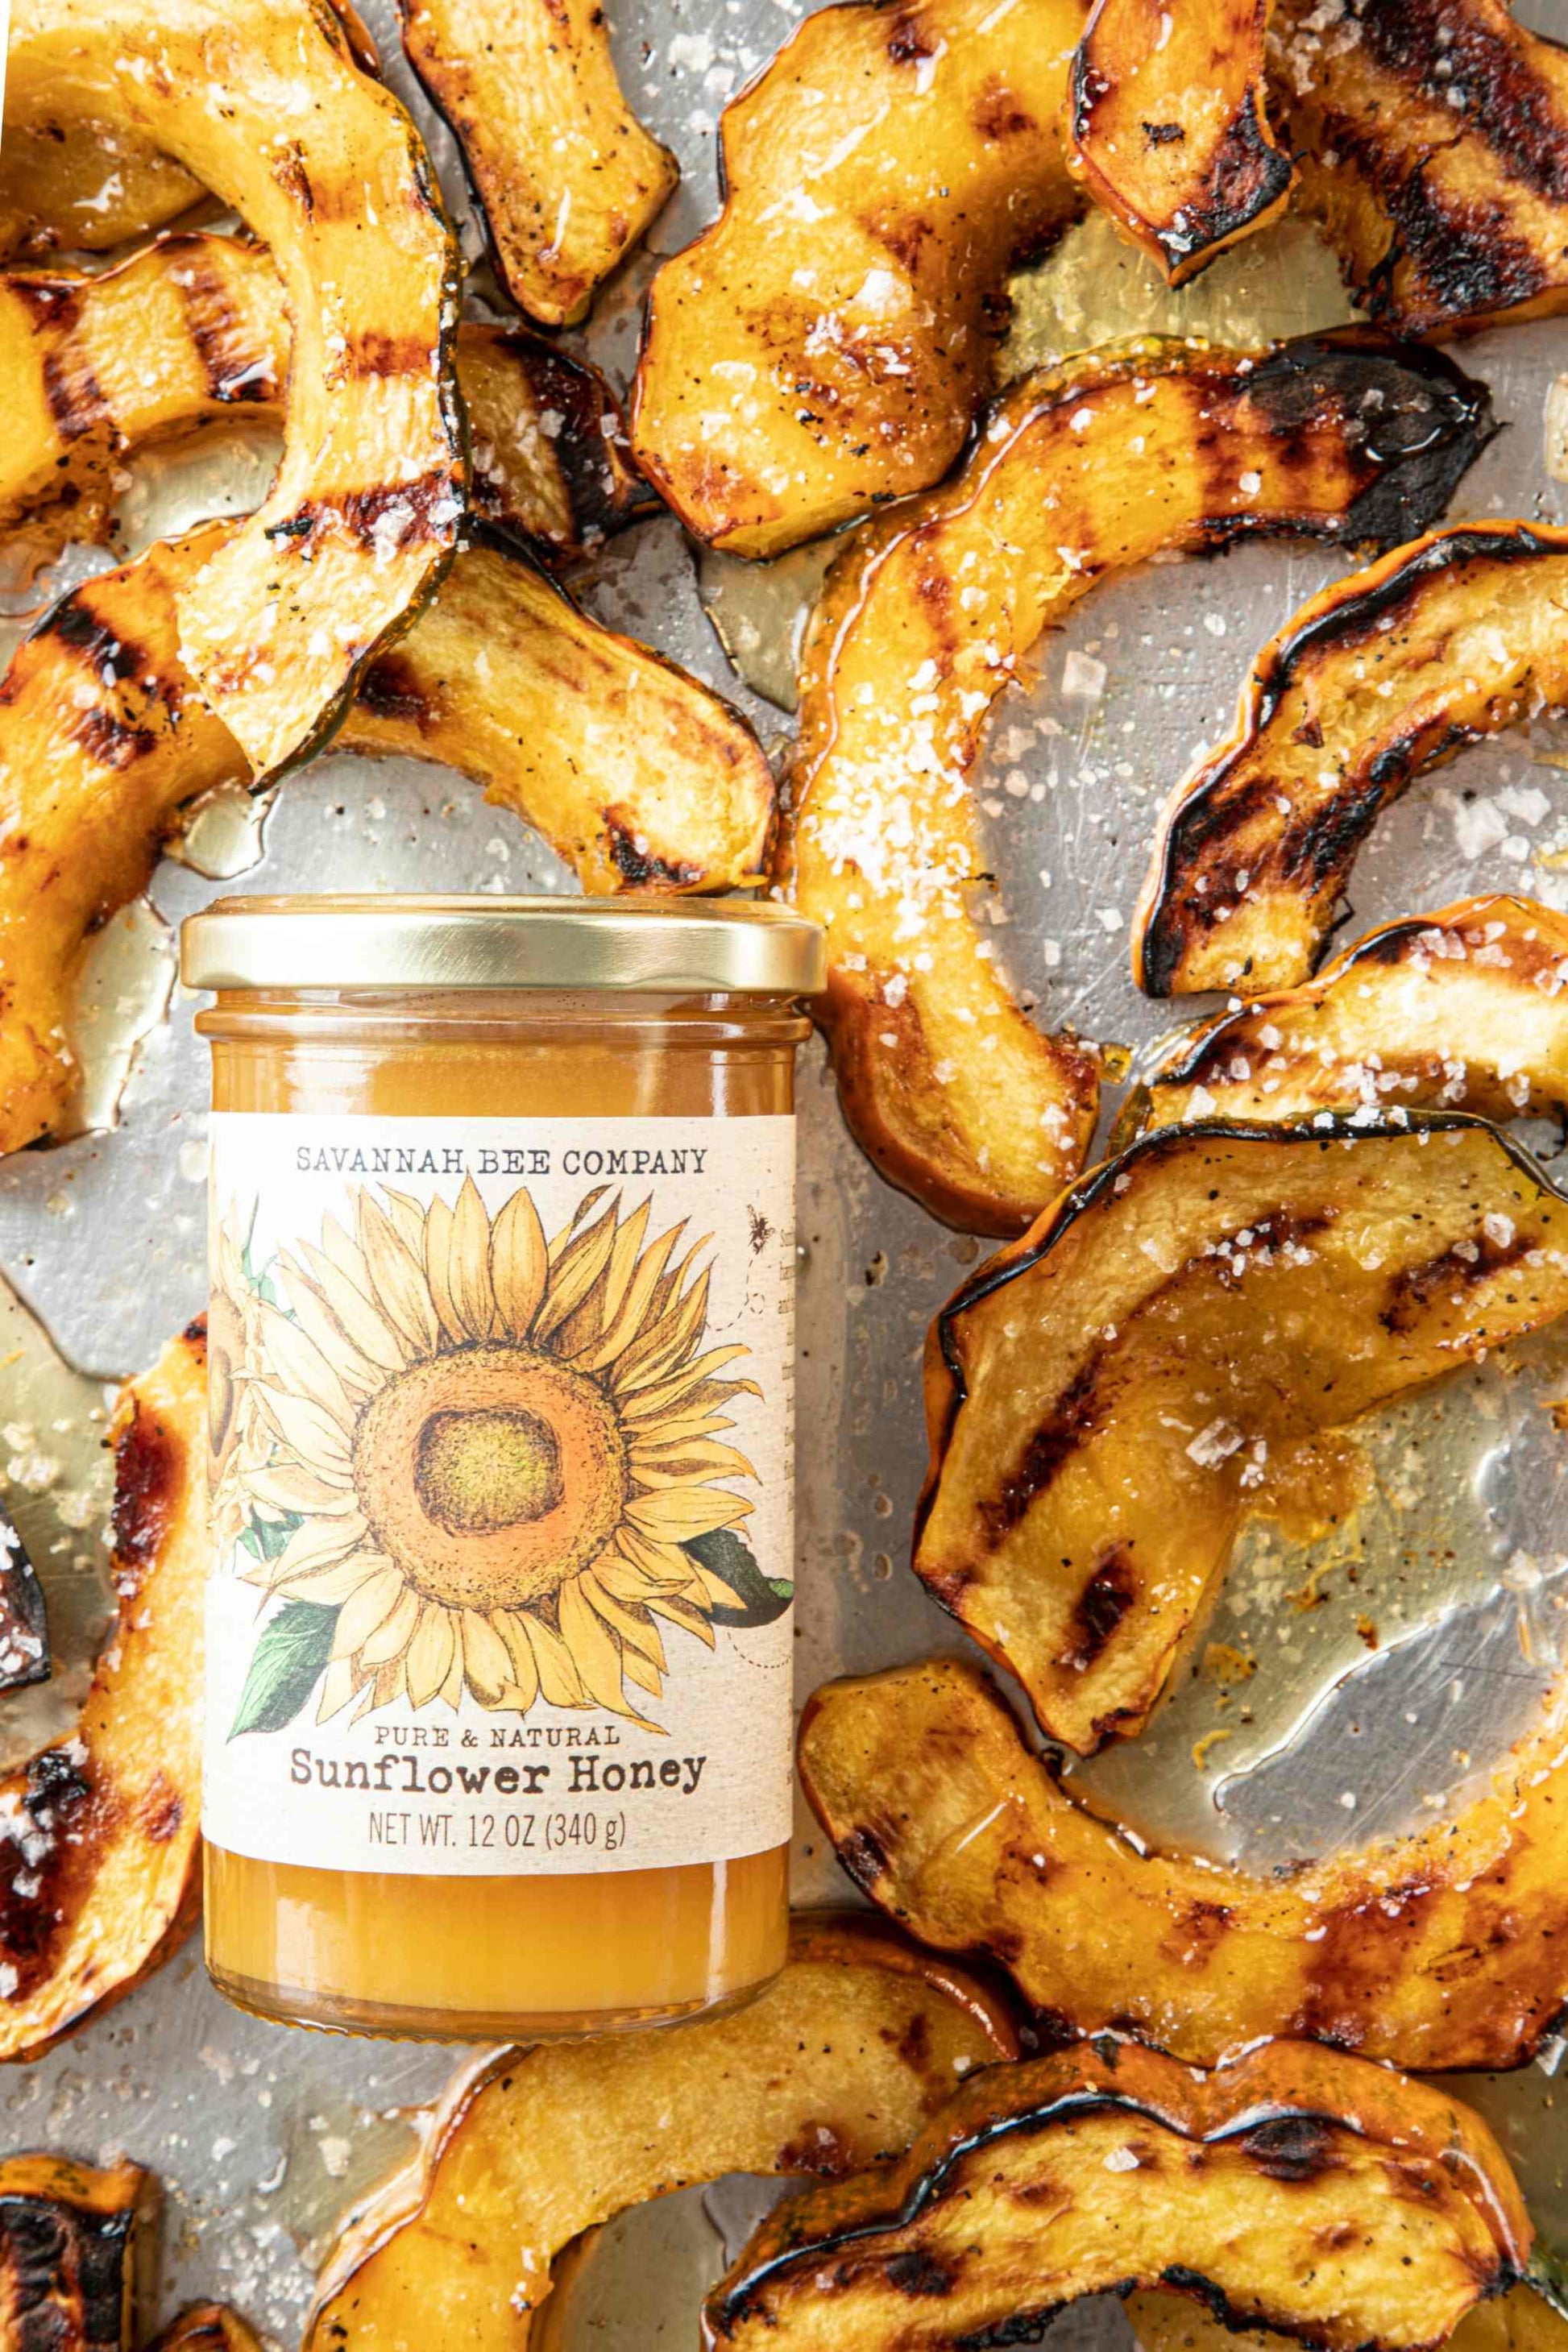 Grilled Acorn Squash with Sunflower Honey